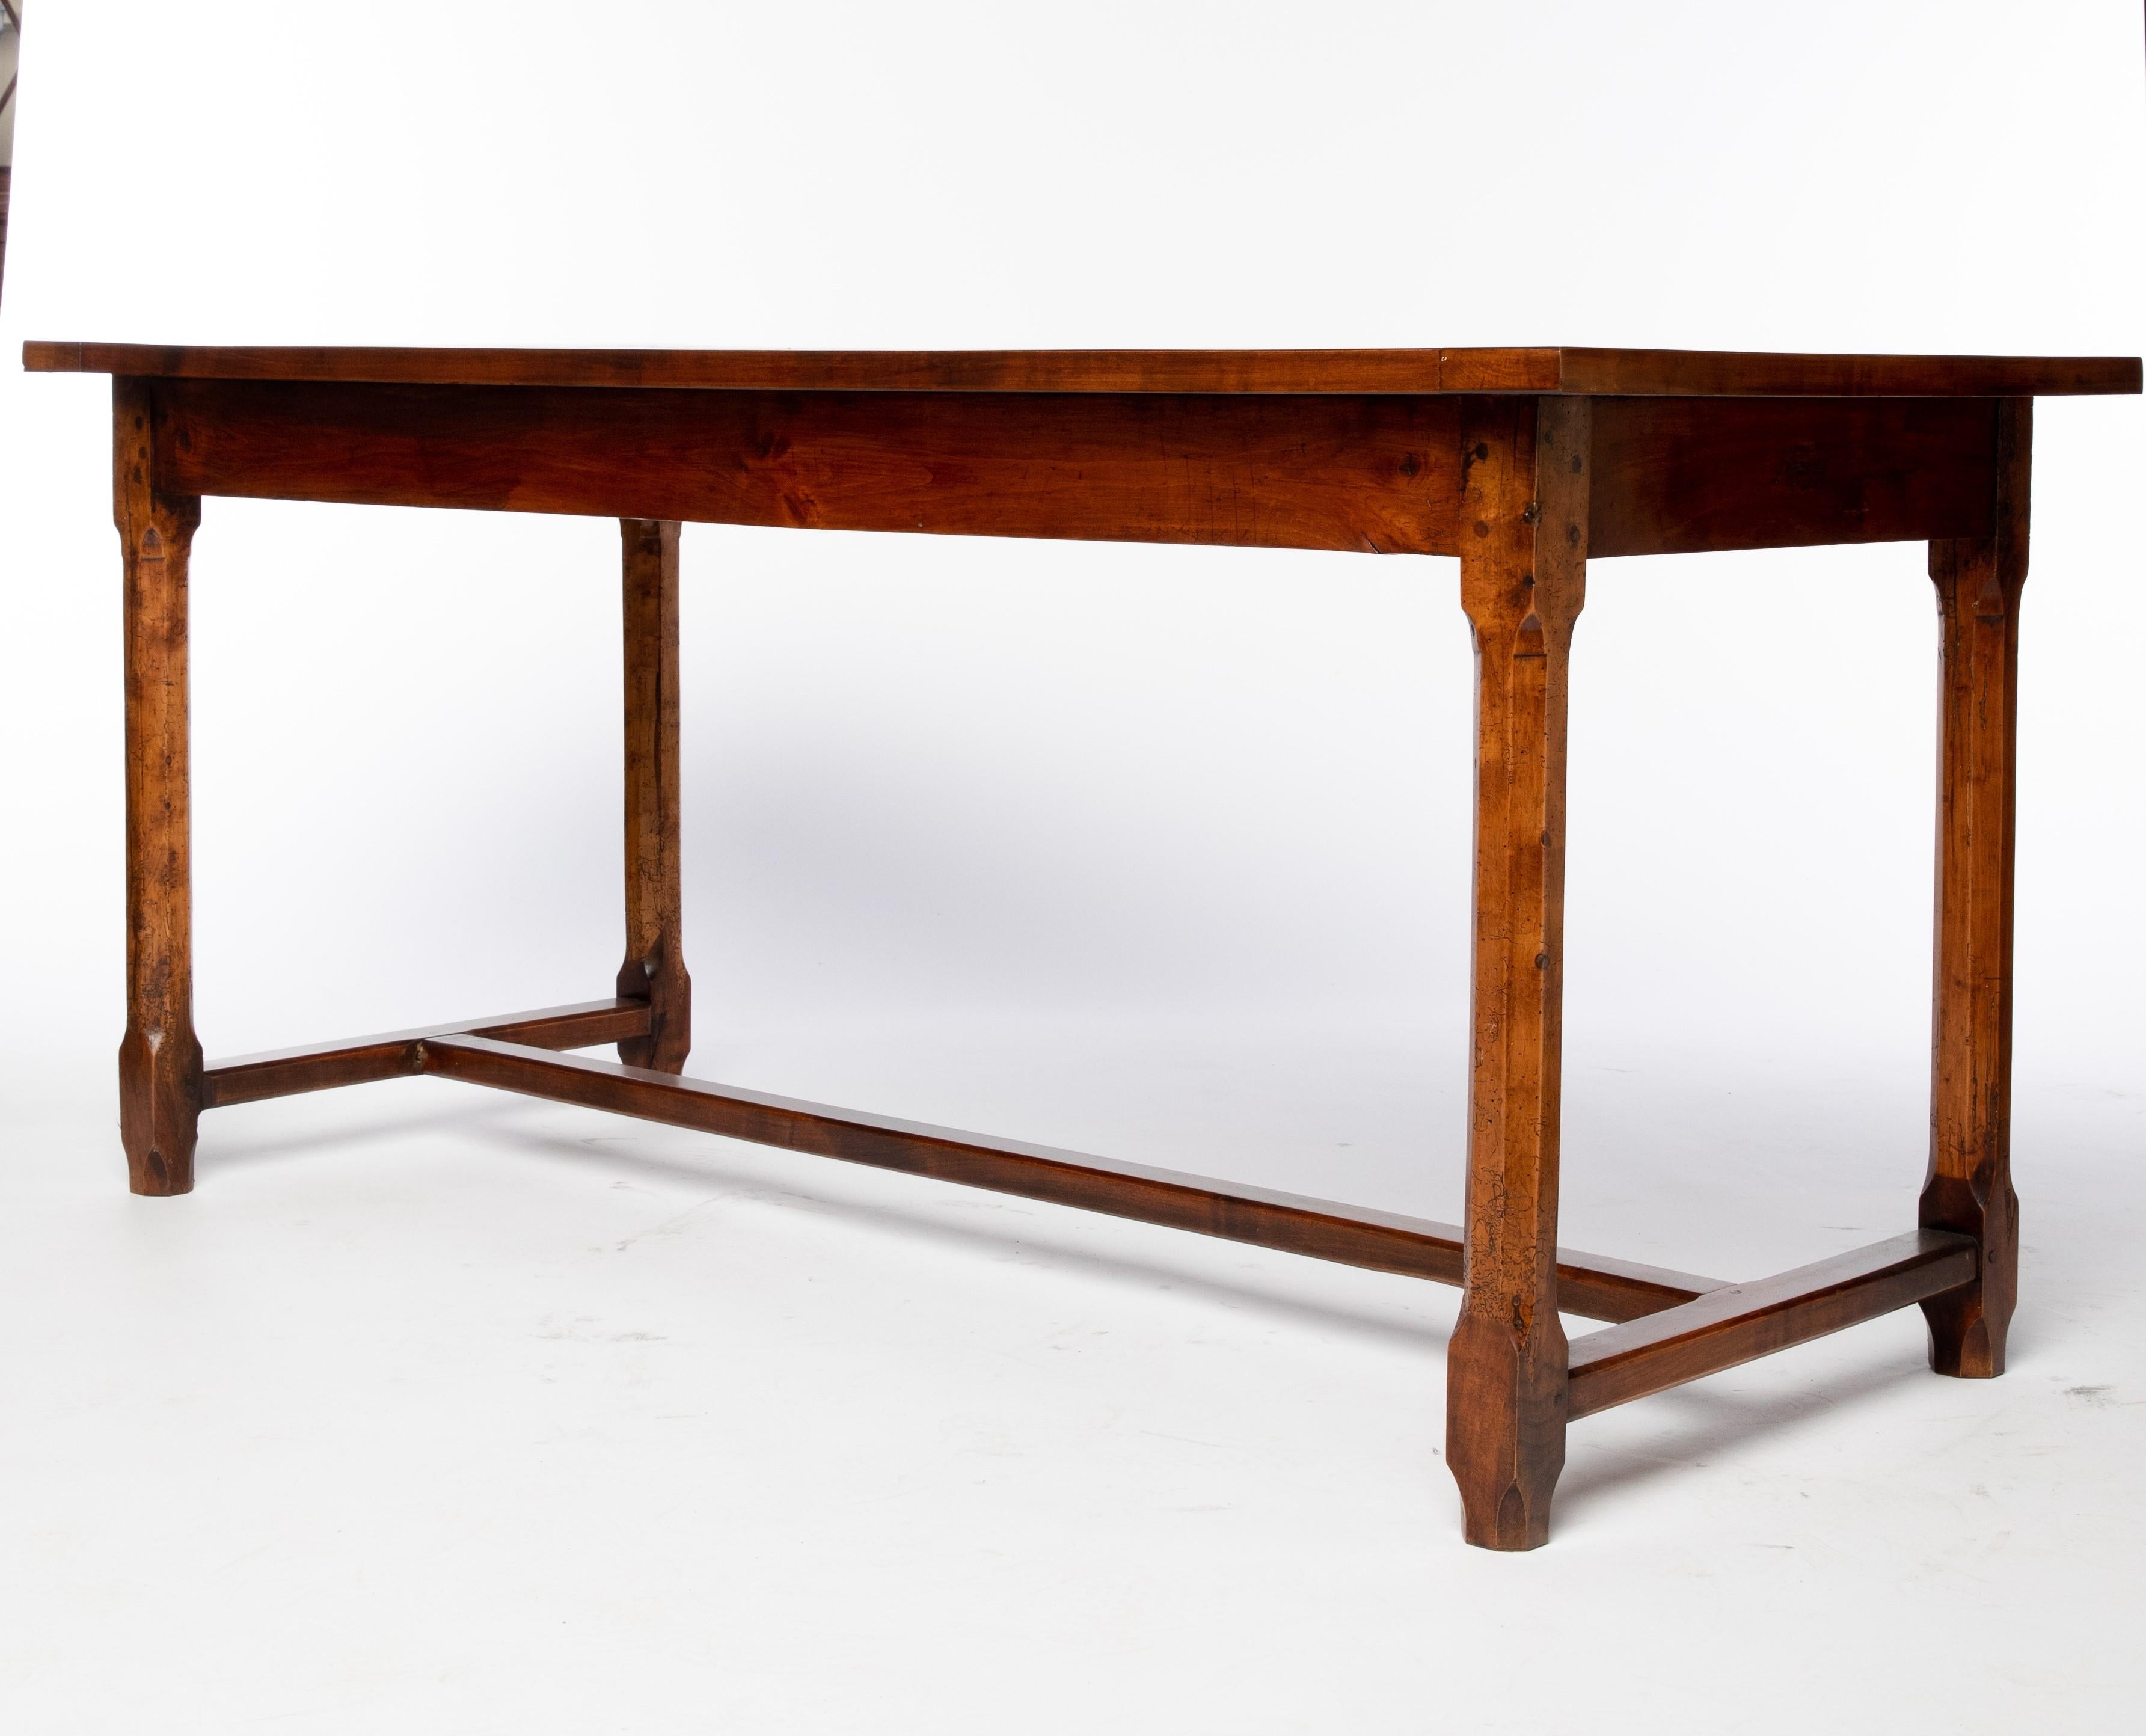 Hand-Crafted Rustic French Fruitwood Farmhouse Table